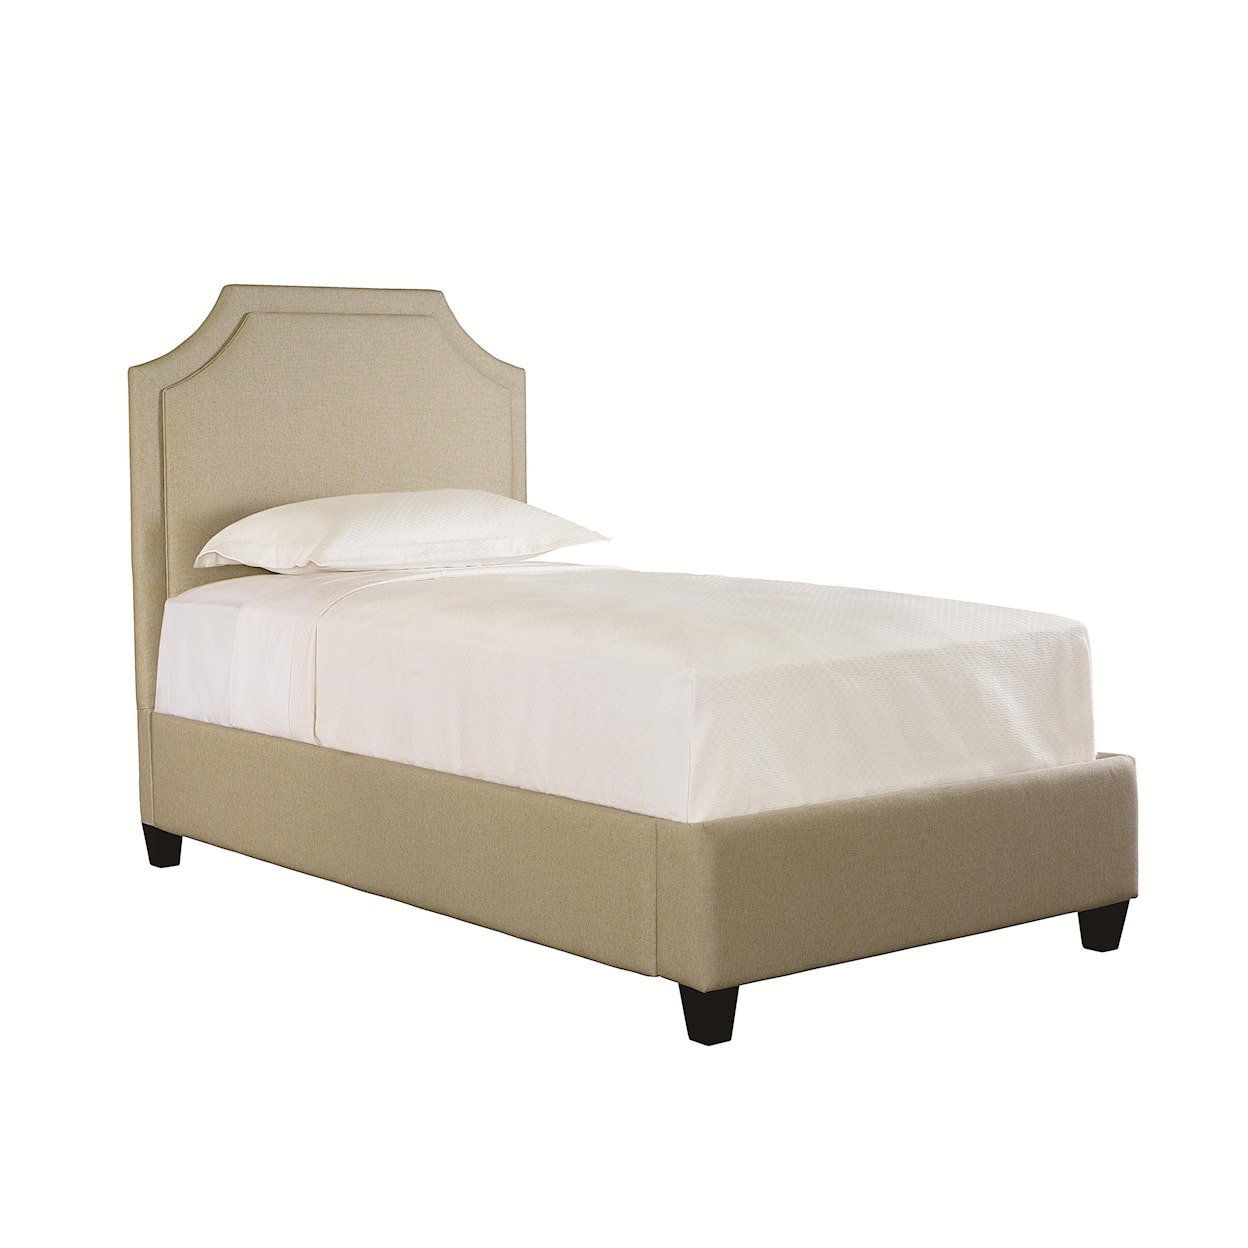 Bassett Custom Upholstered Beds Queen Florence Upholstered Bed with Low FB 